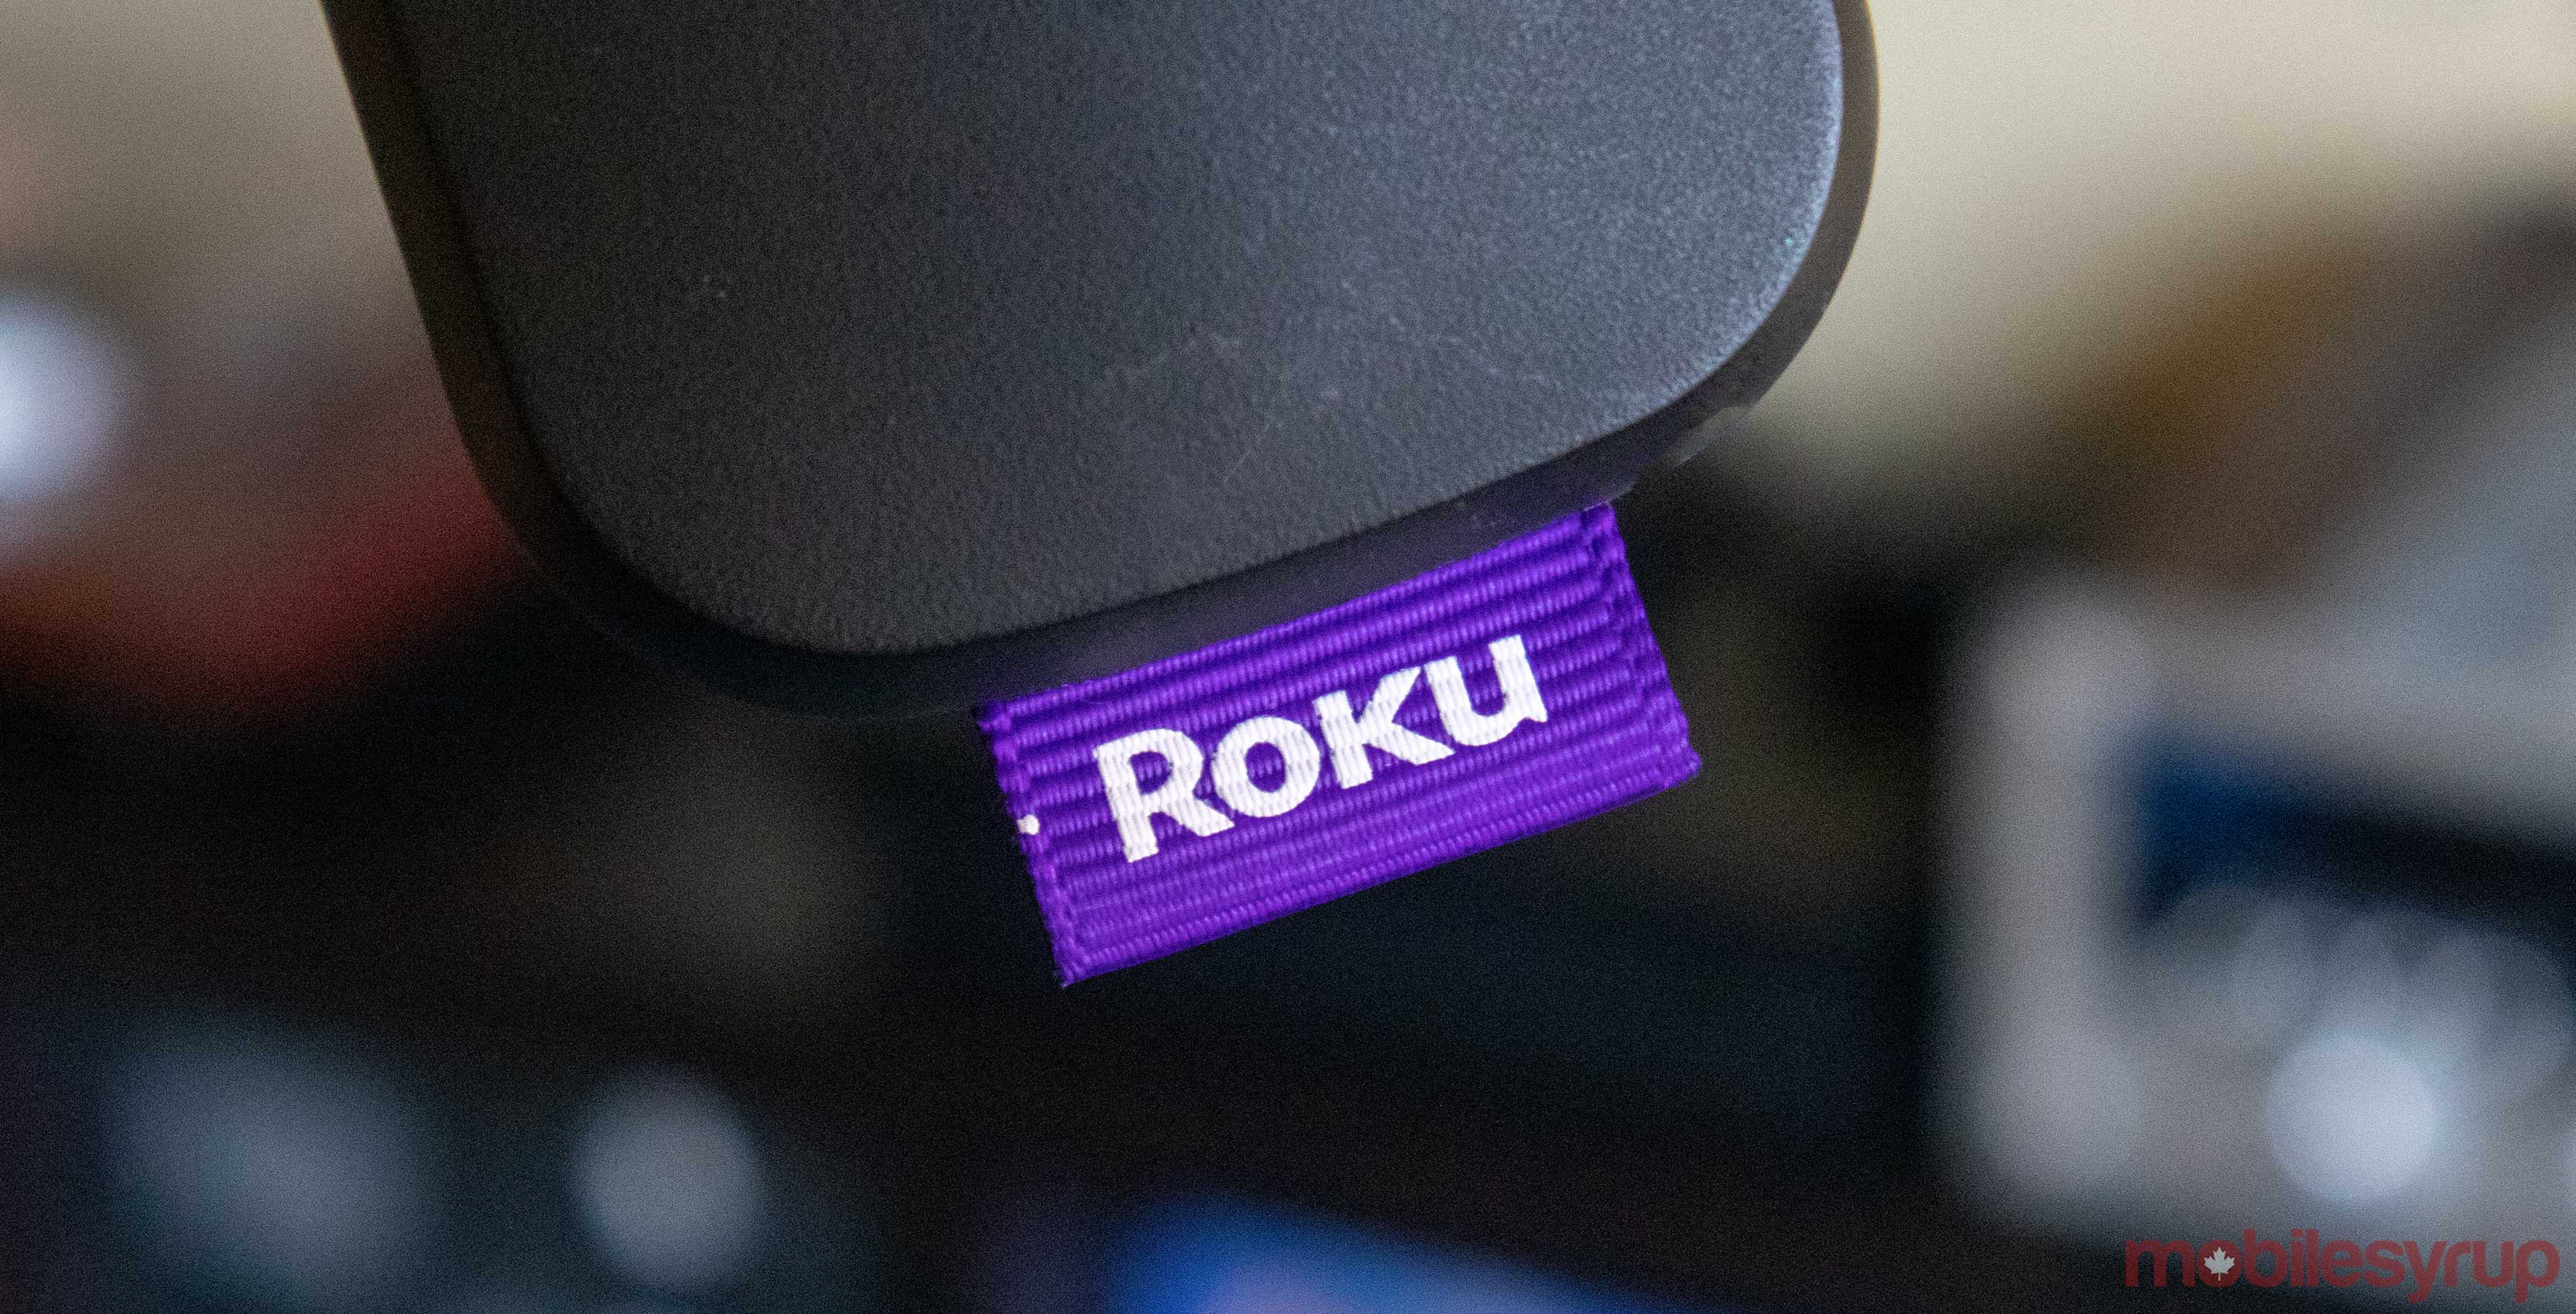 Canadians Can Now Watch Cbc Through Their Roku Tv